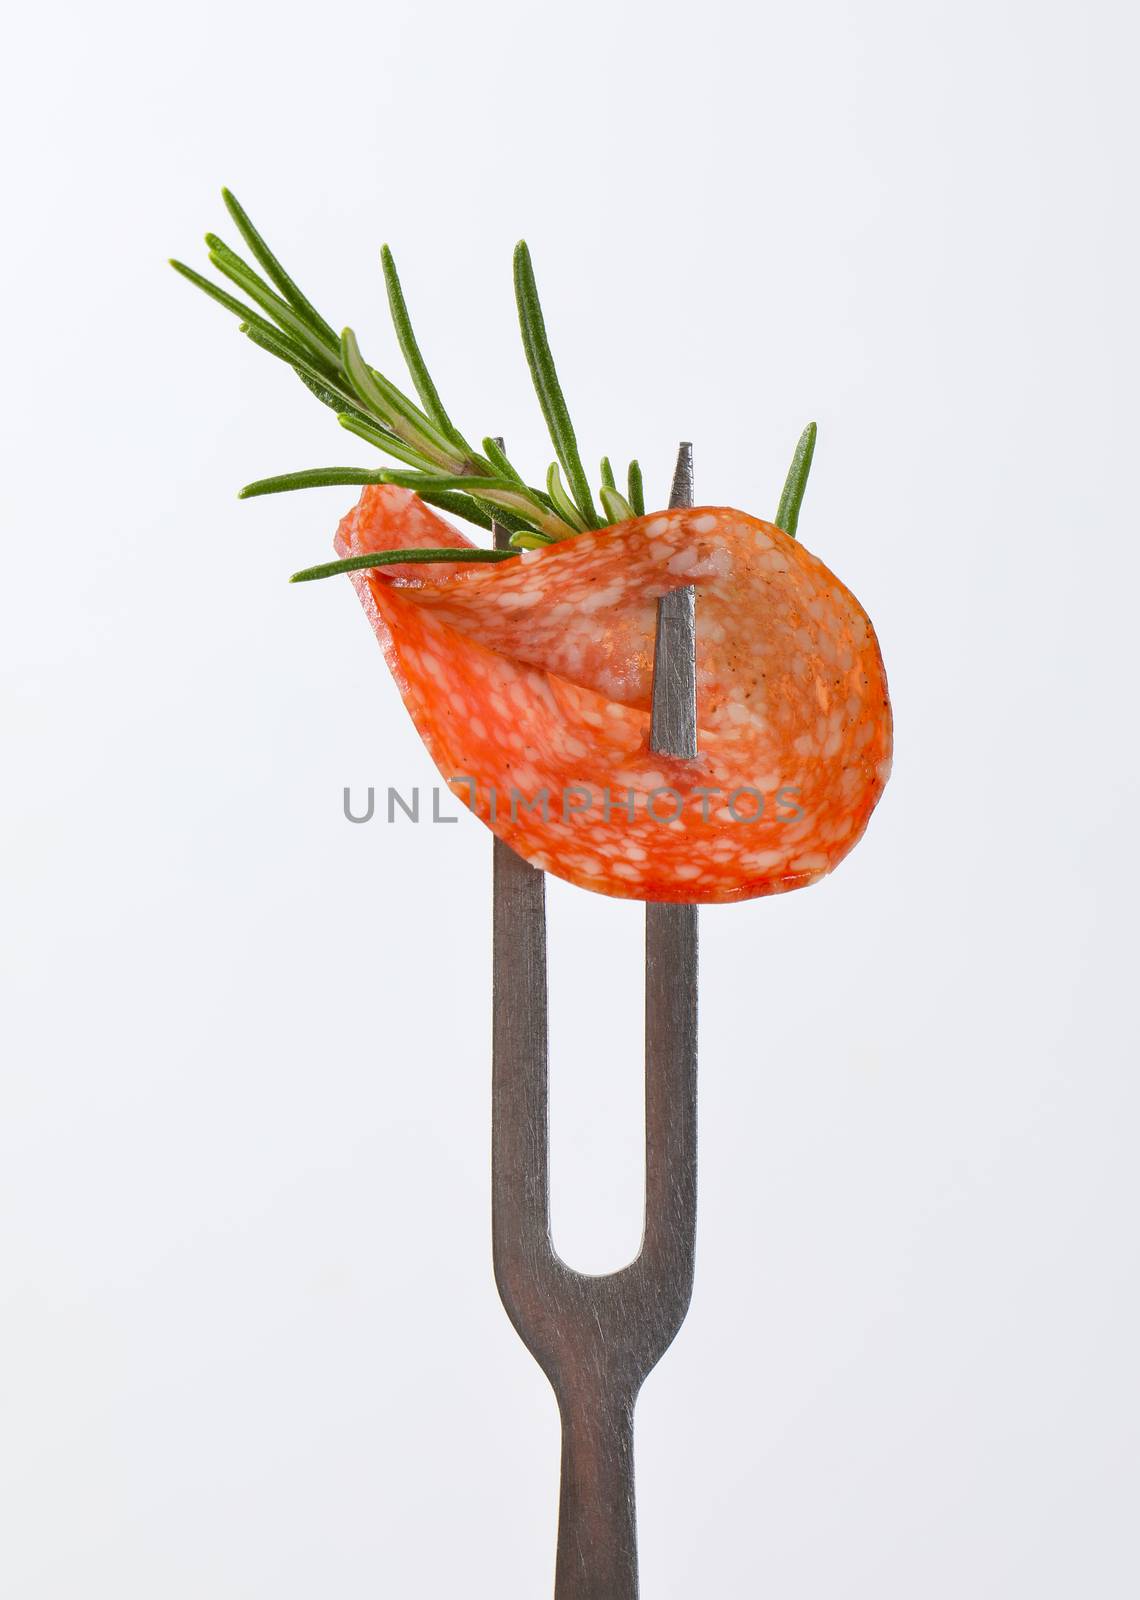 Thin salami slice and rosemary on fork by Digifoodstock